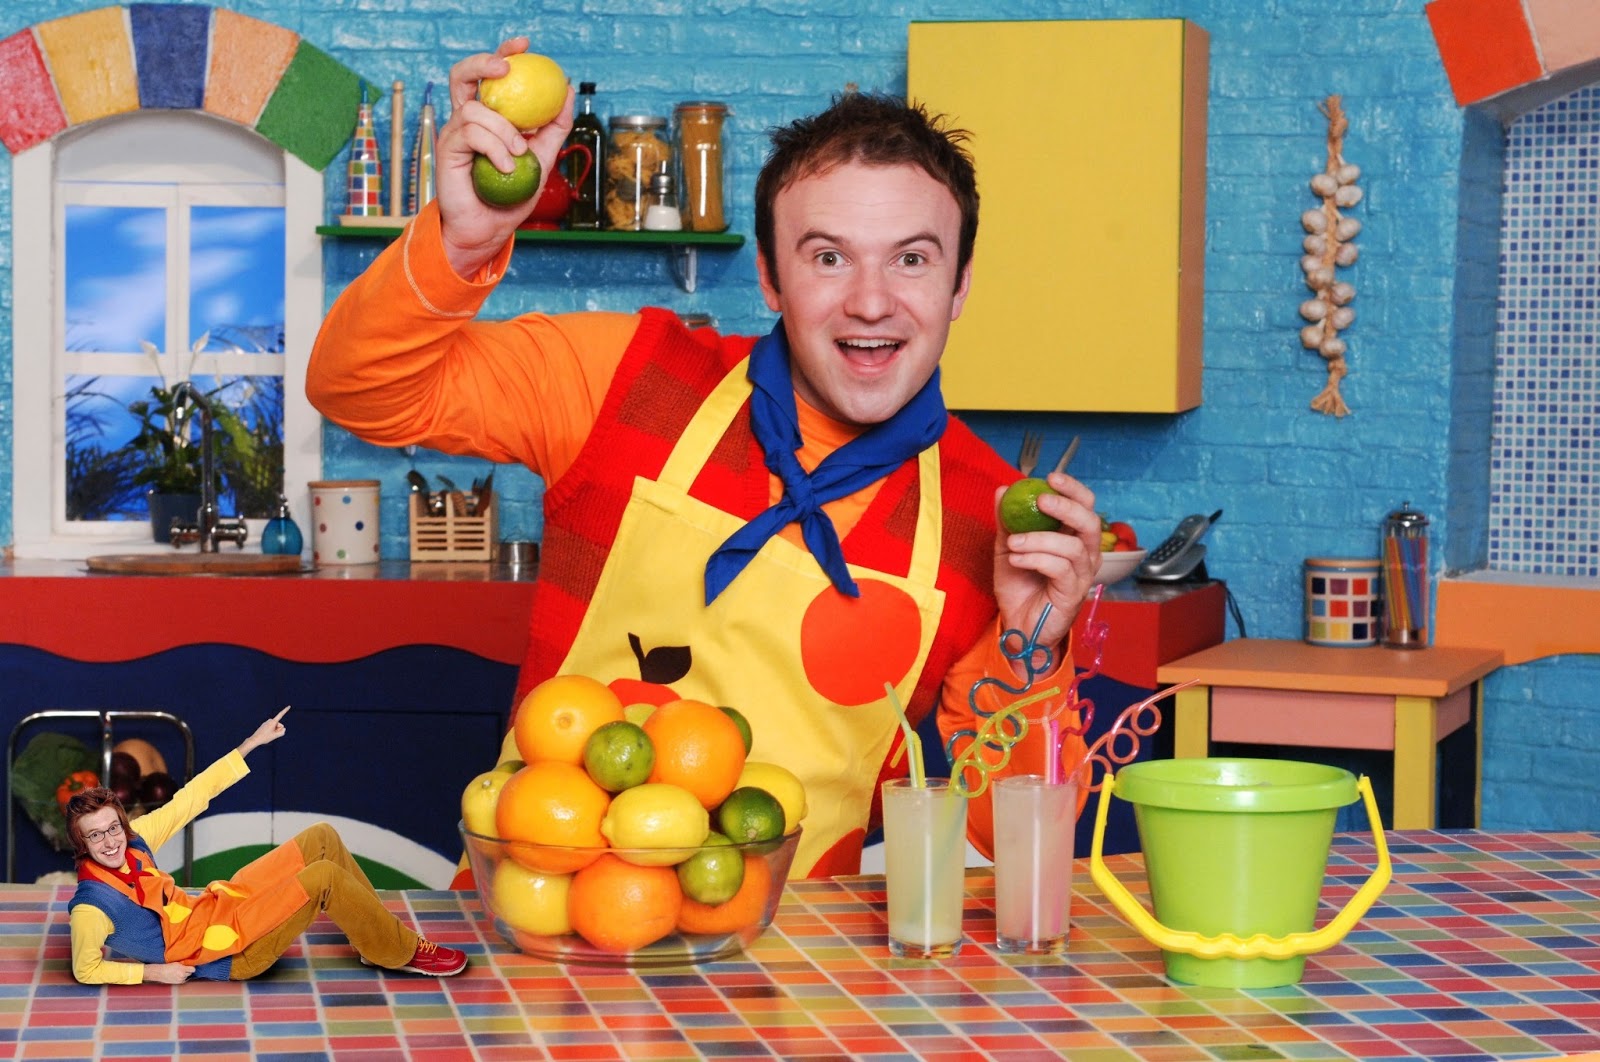 Beloved CBeebies show Big Cook, Little Cook returns after nearly 20 years, The Manc